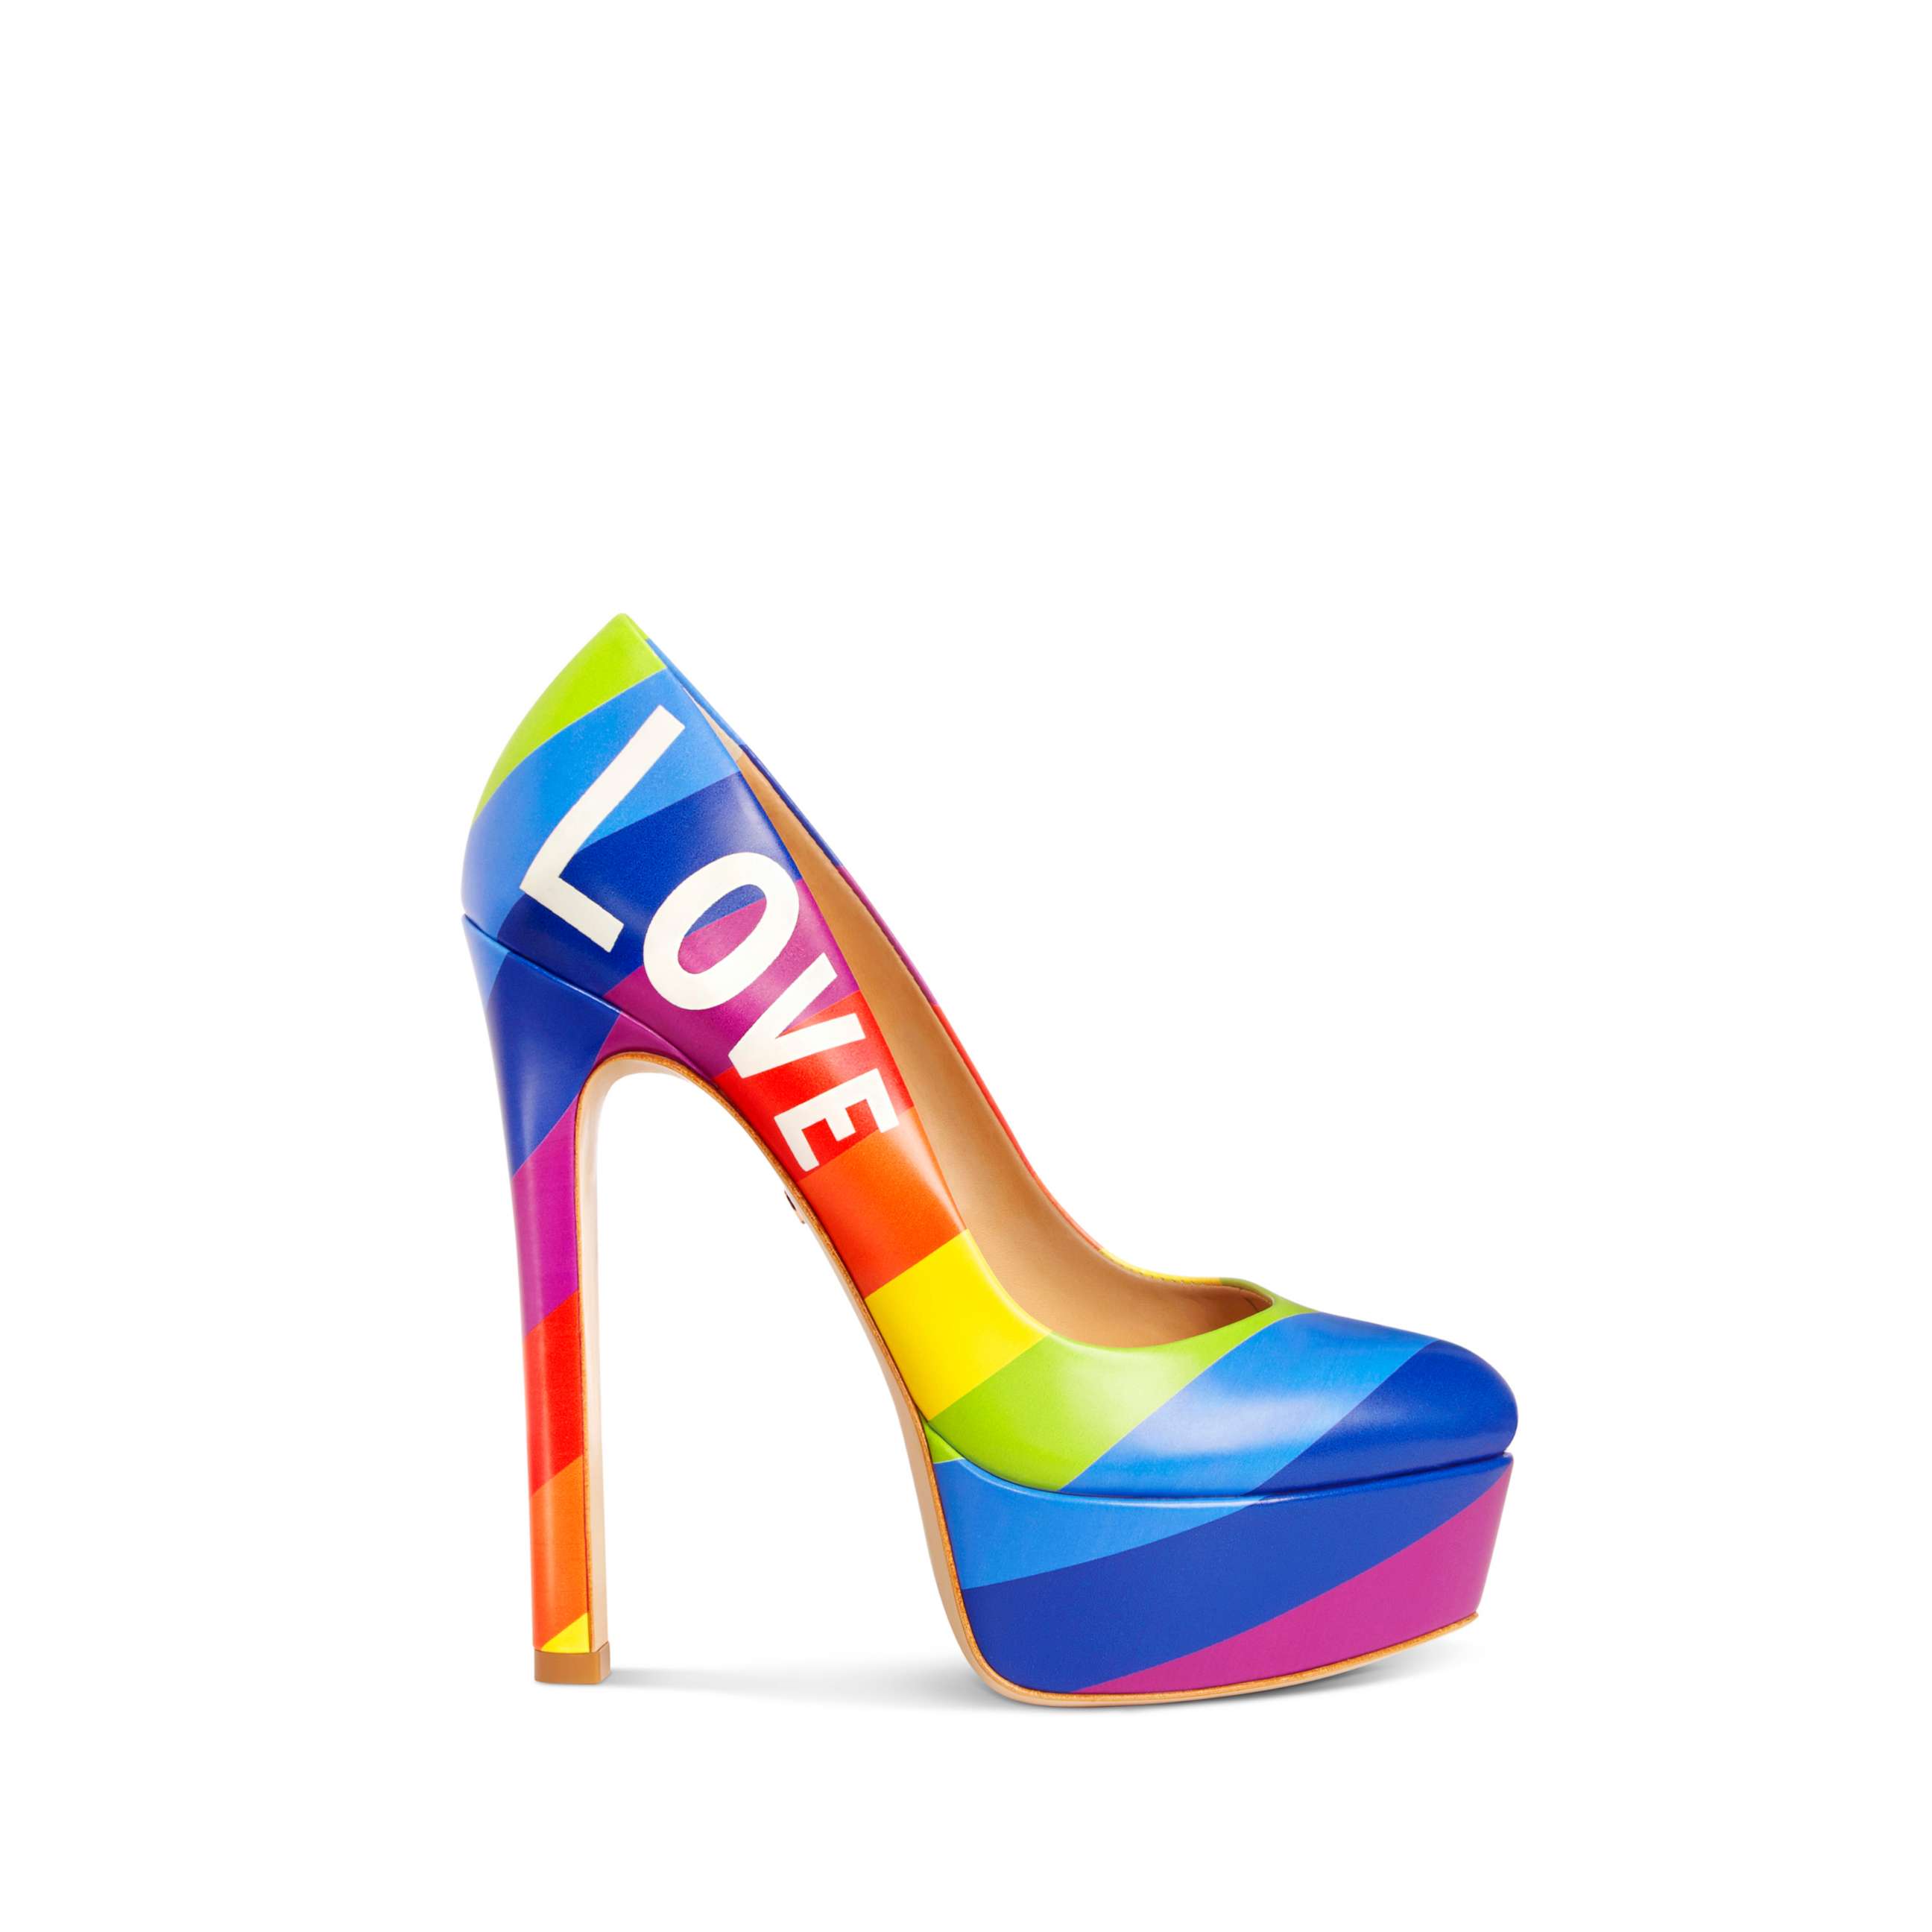 PHOTO: Check out all the best Pride-inspired products to help you celebrate in style this year.